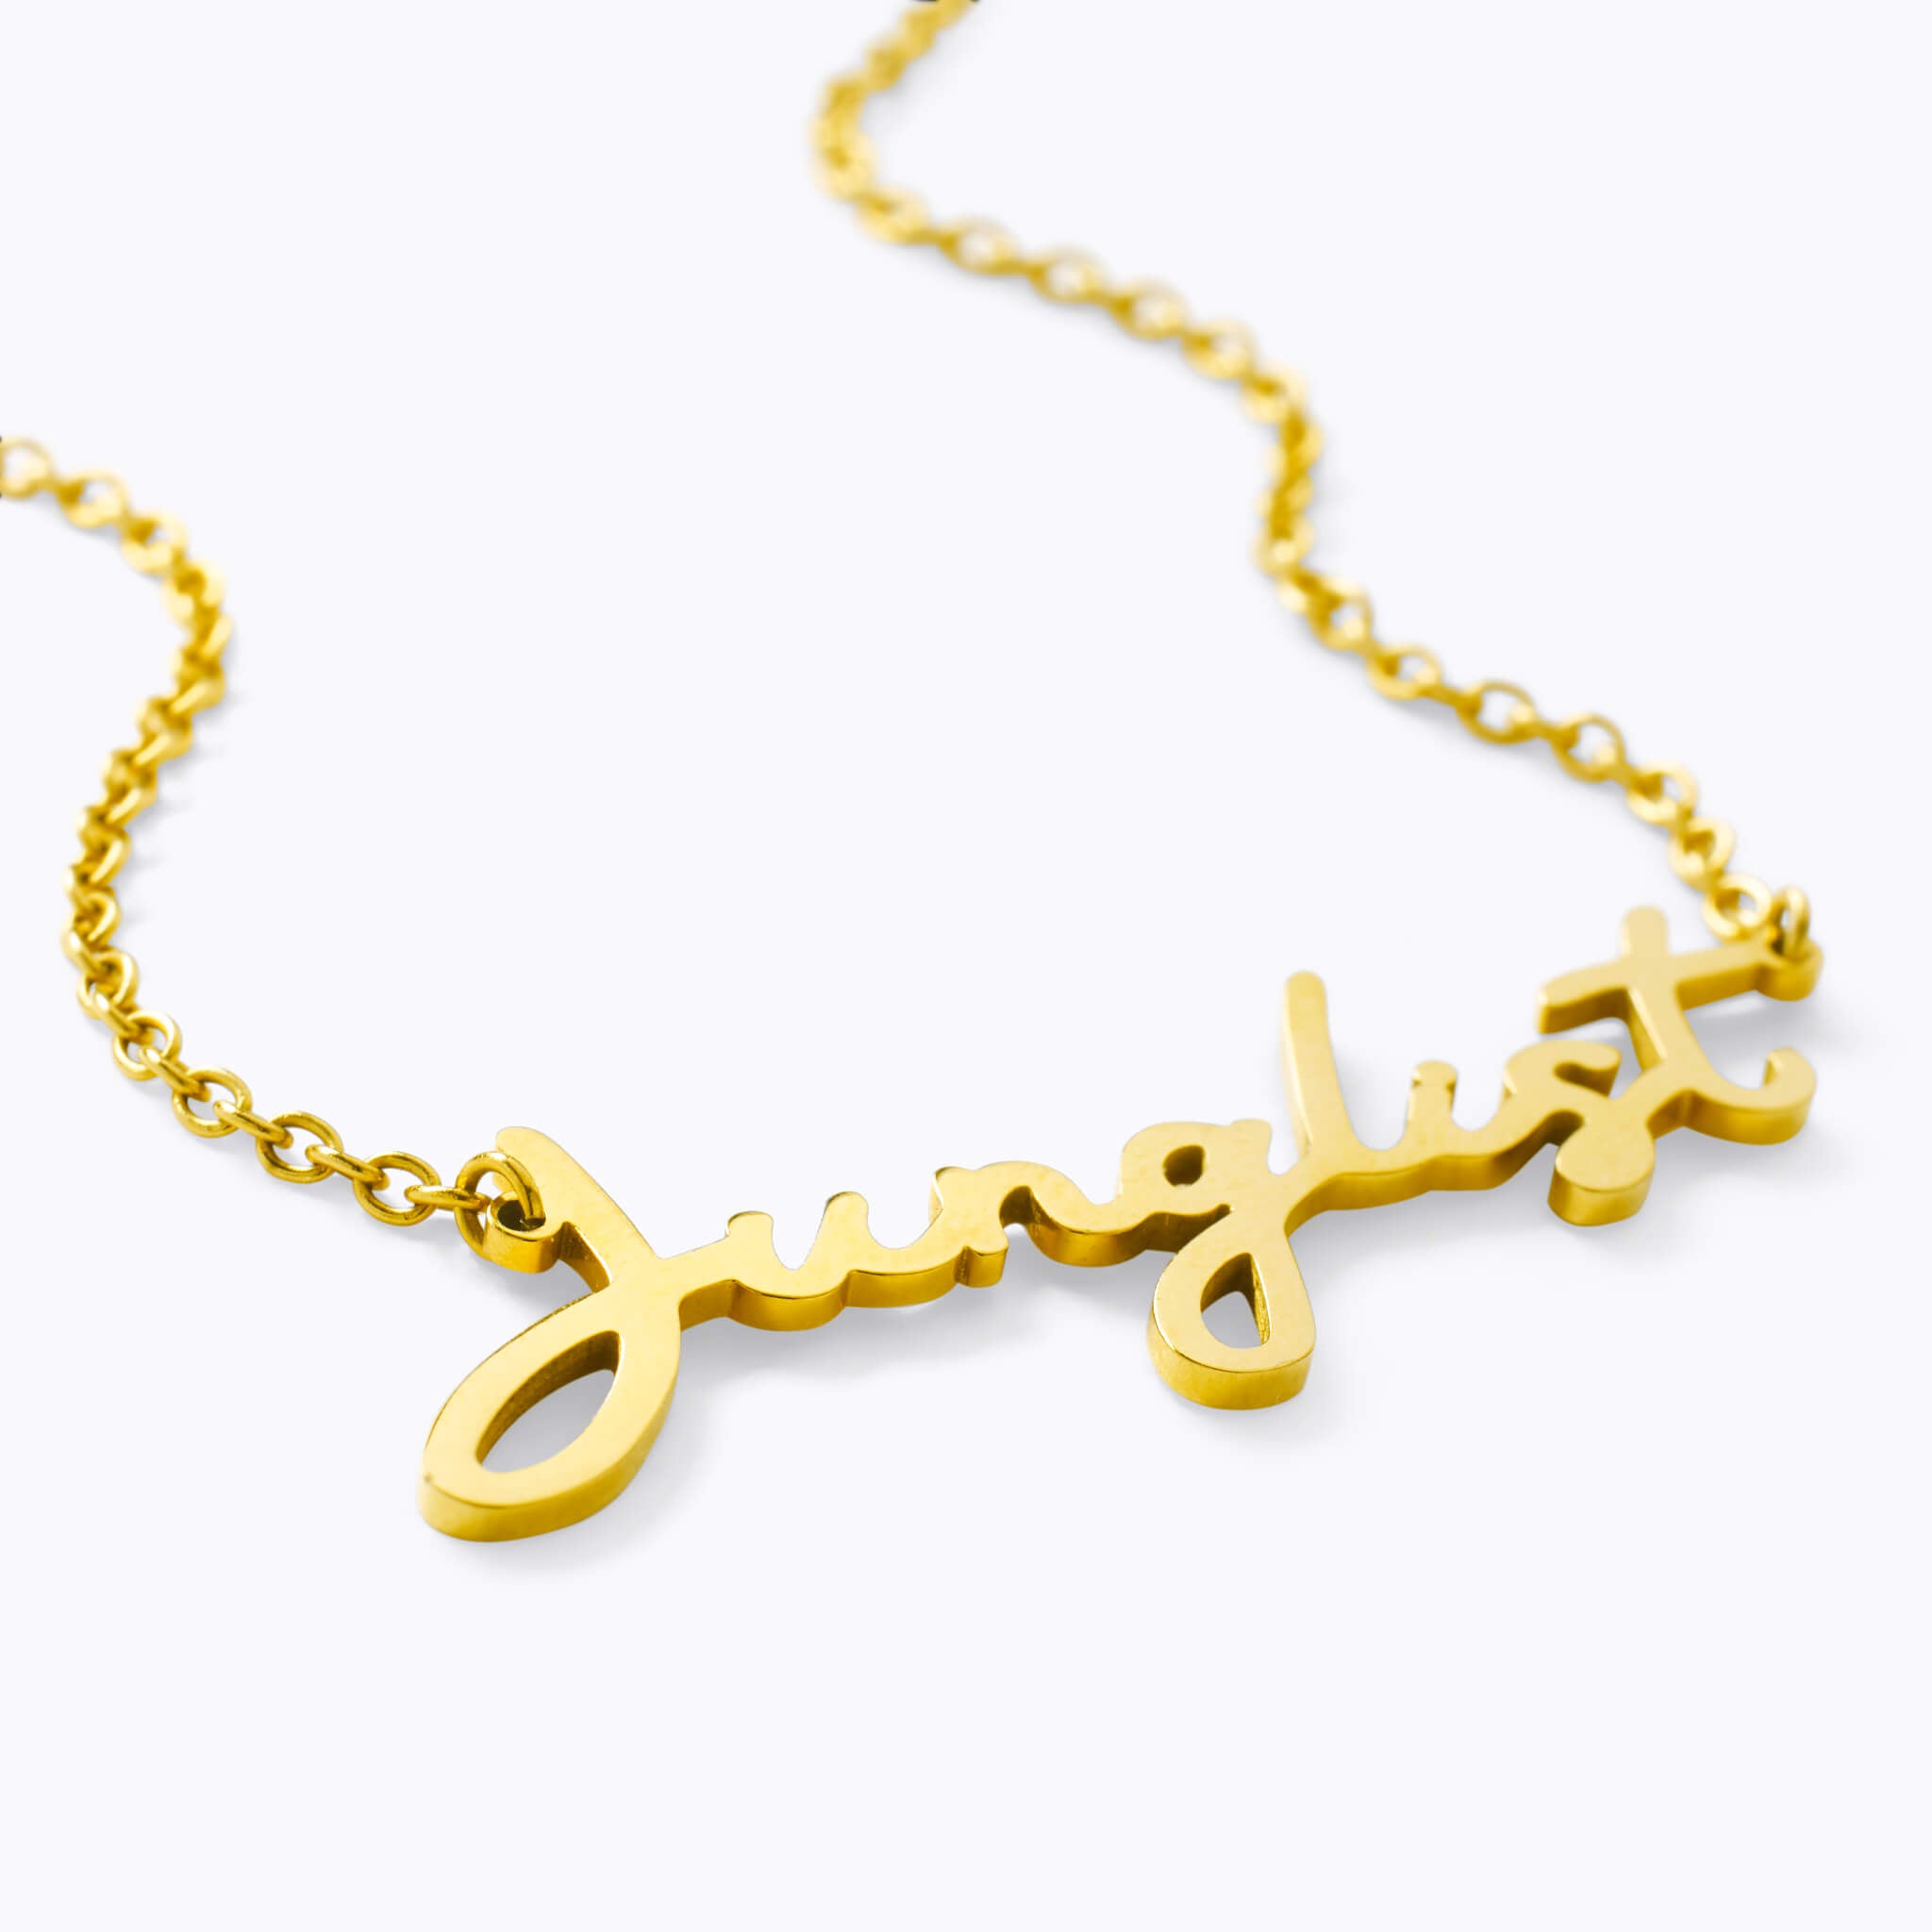 Gold Plated Junglist Necklace